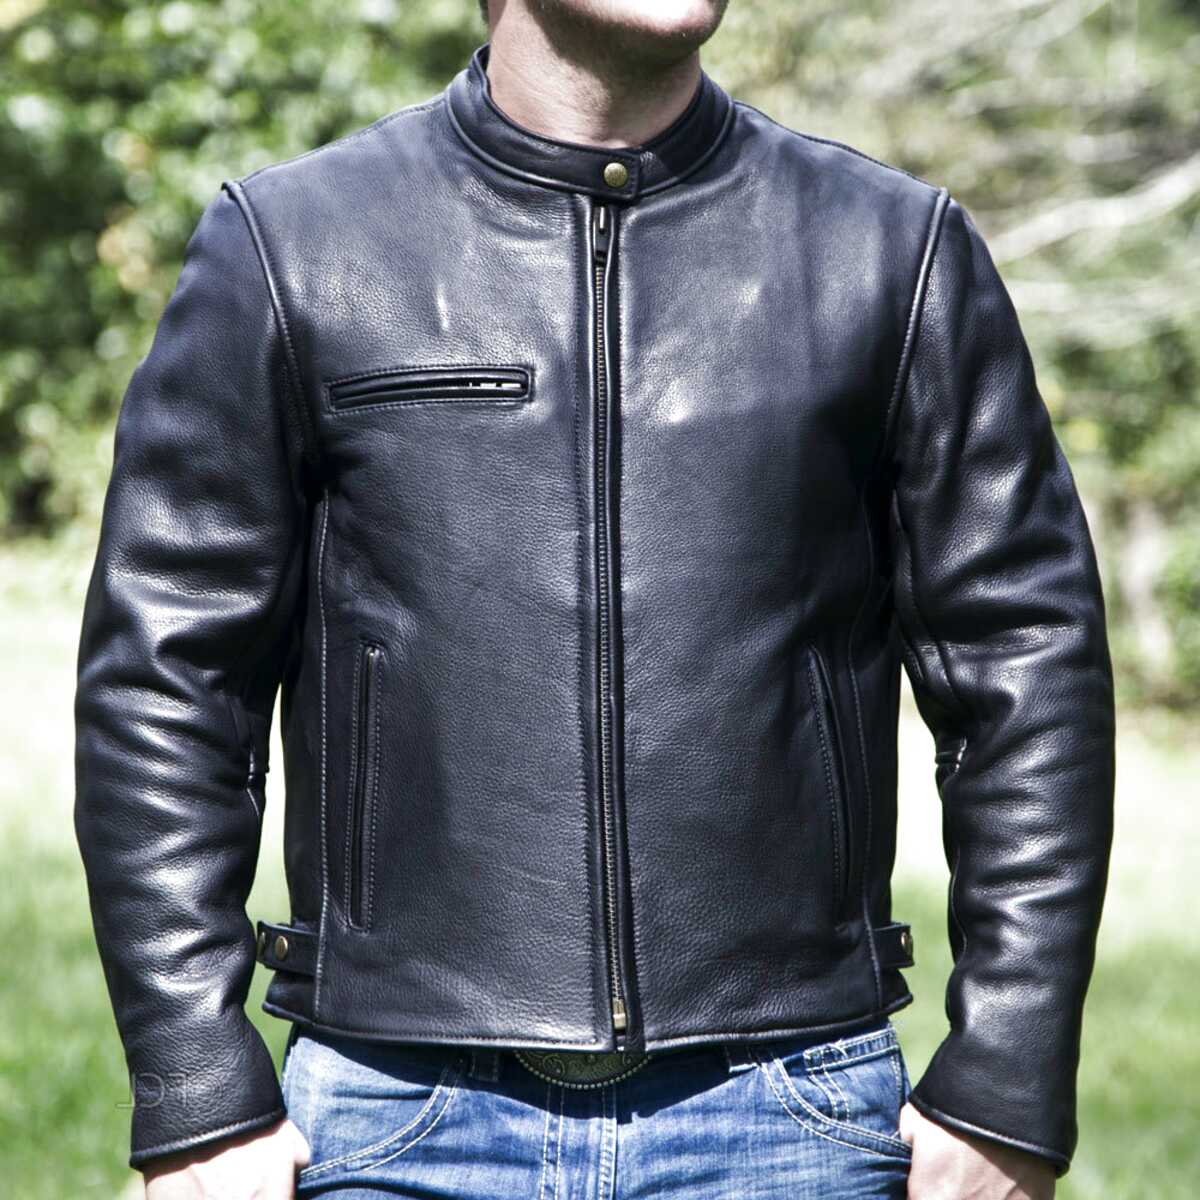 Fox Creek Leather Jacket for sale in UK 